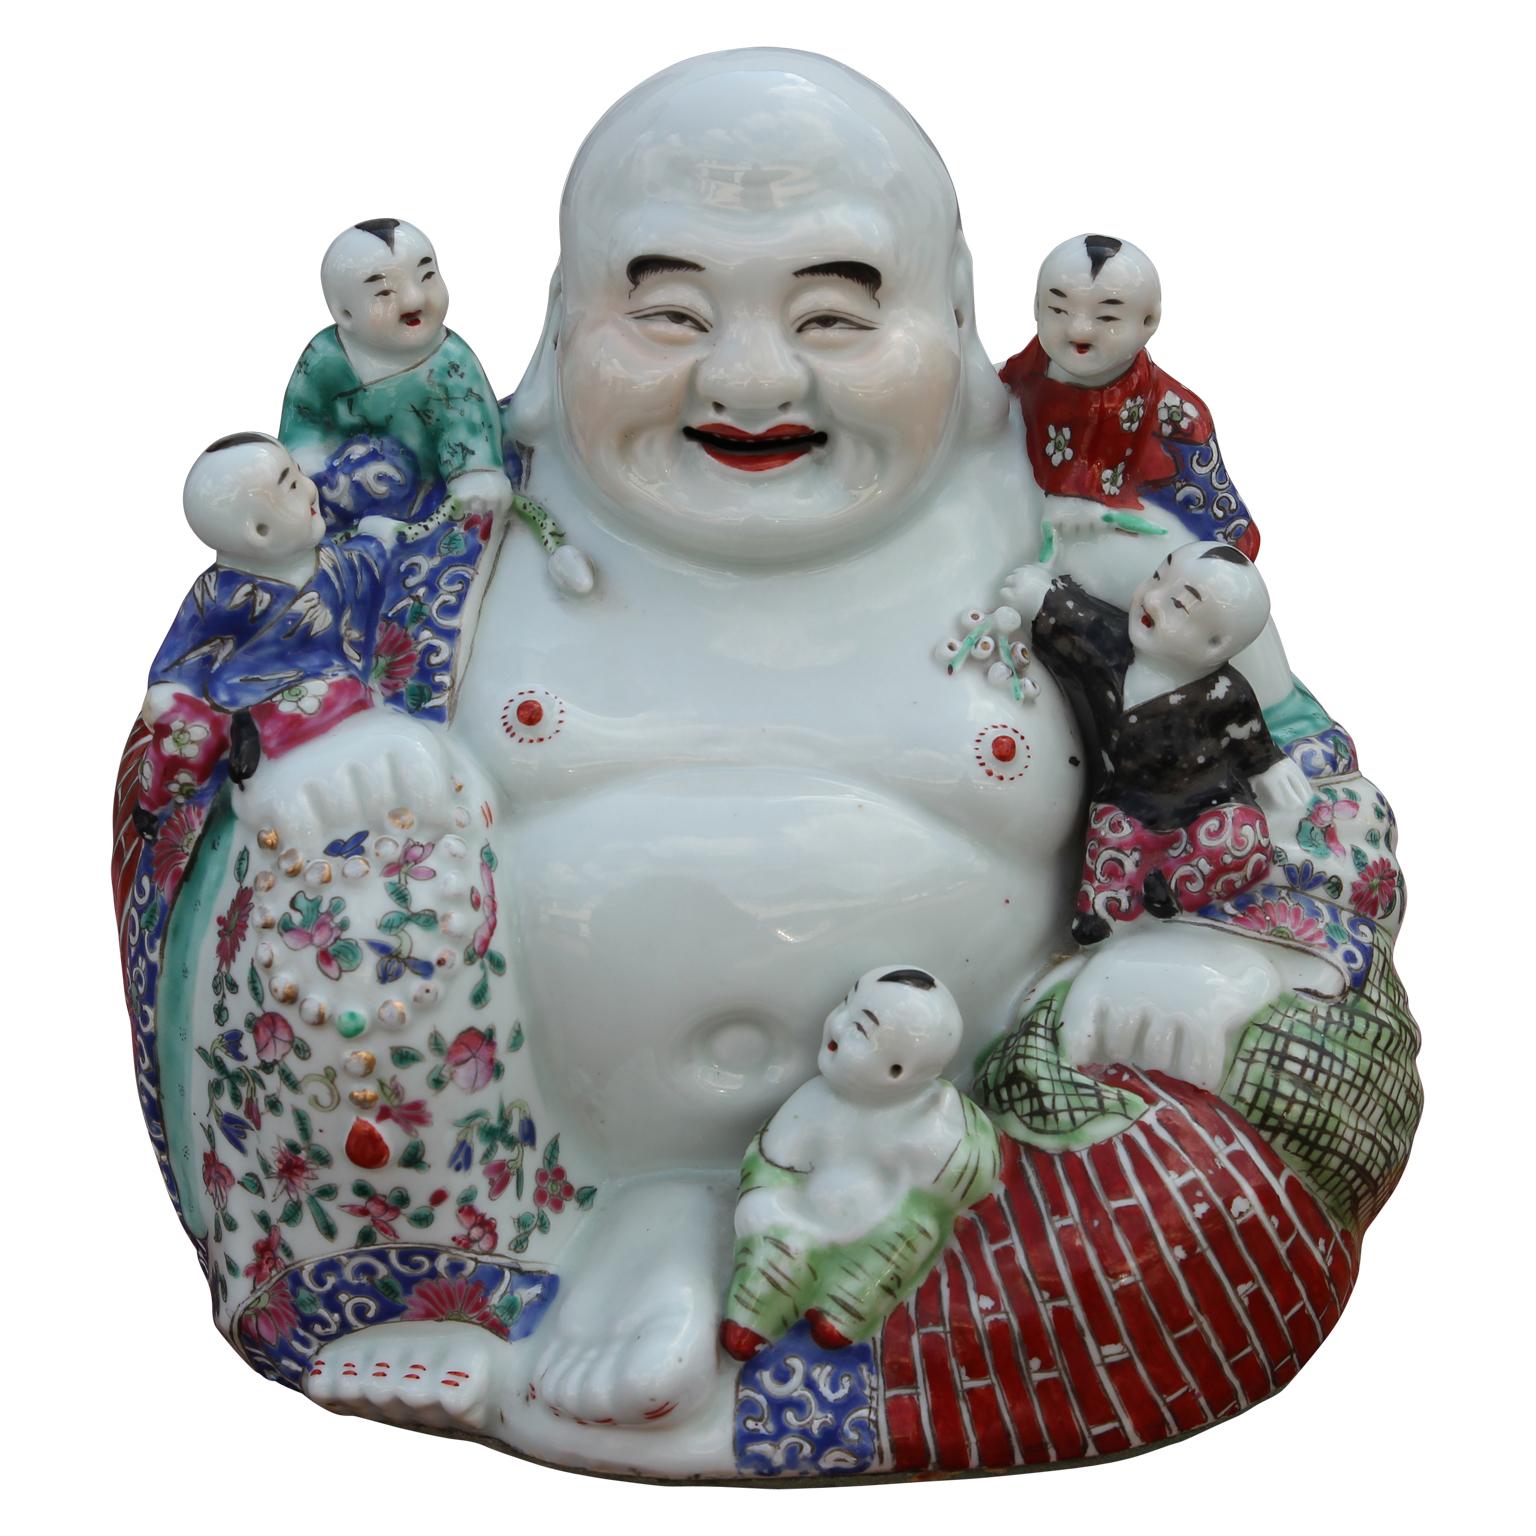 Unknown Figurative Sculpture - Painted Porcelain Chinese Hotei Buddha with Children